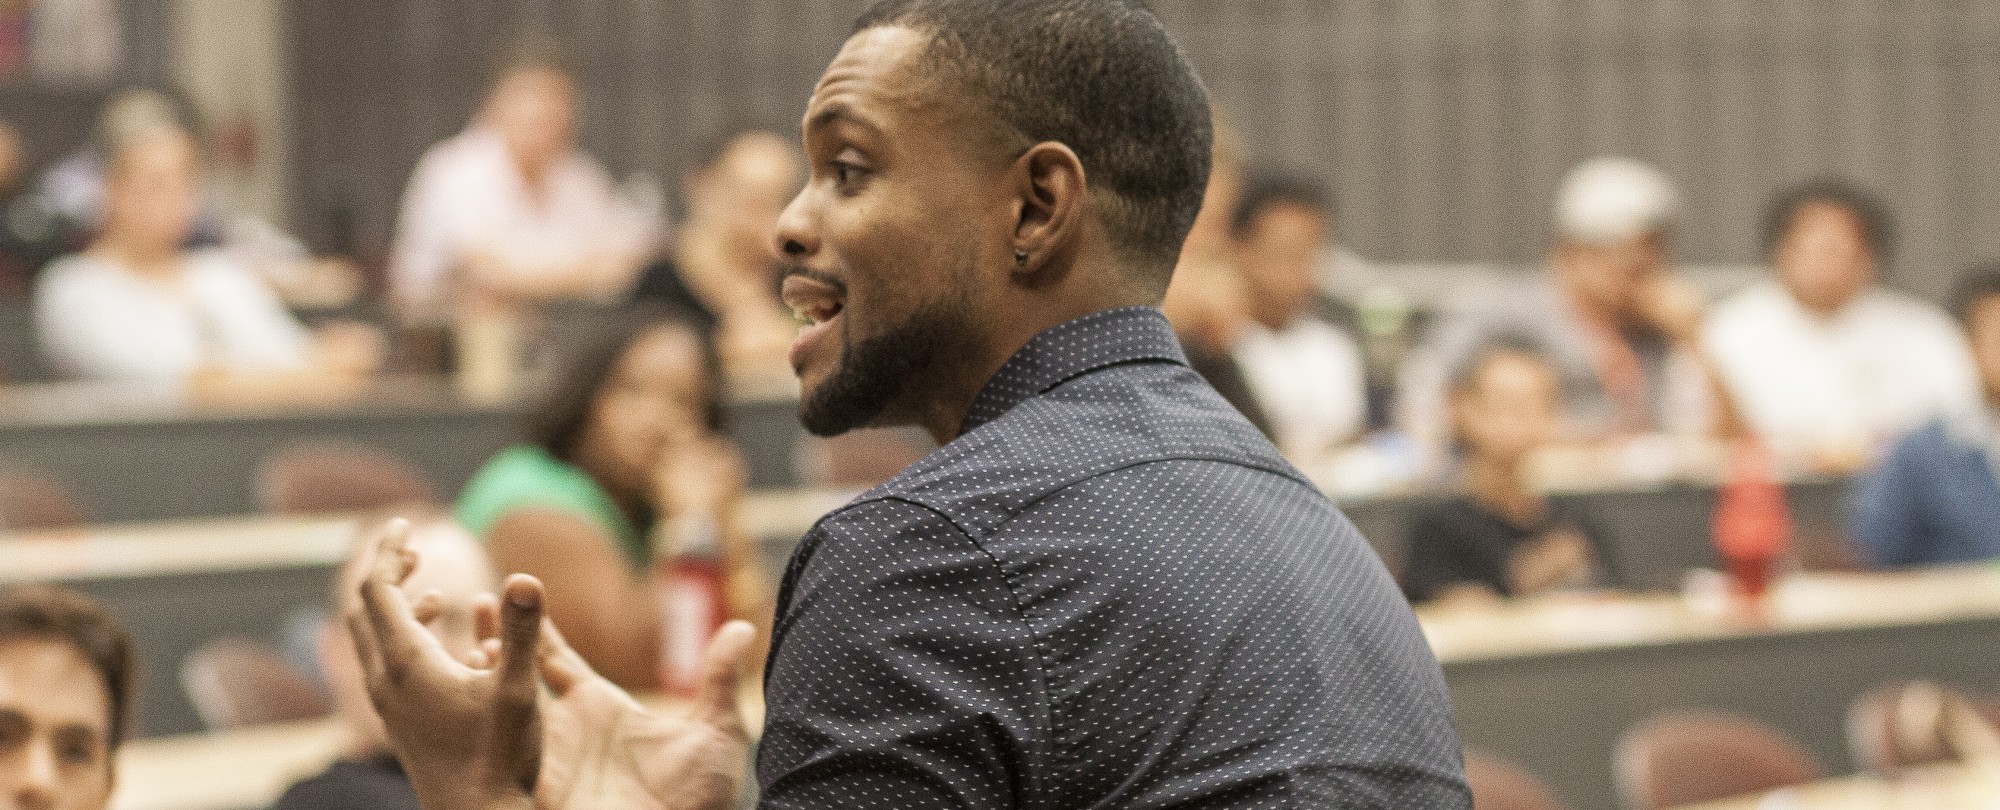 Motivational speaker Richard L. Taylor, Jr. speaking to students at Palomar College on Feb. 25, 2016. The event was hosted by Palomar's TRiO/SSS Department. (Stephen Davis/The Telescope)